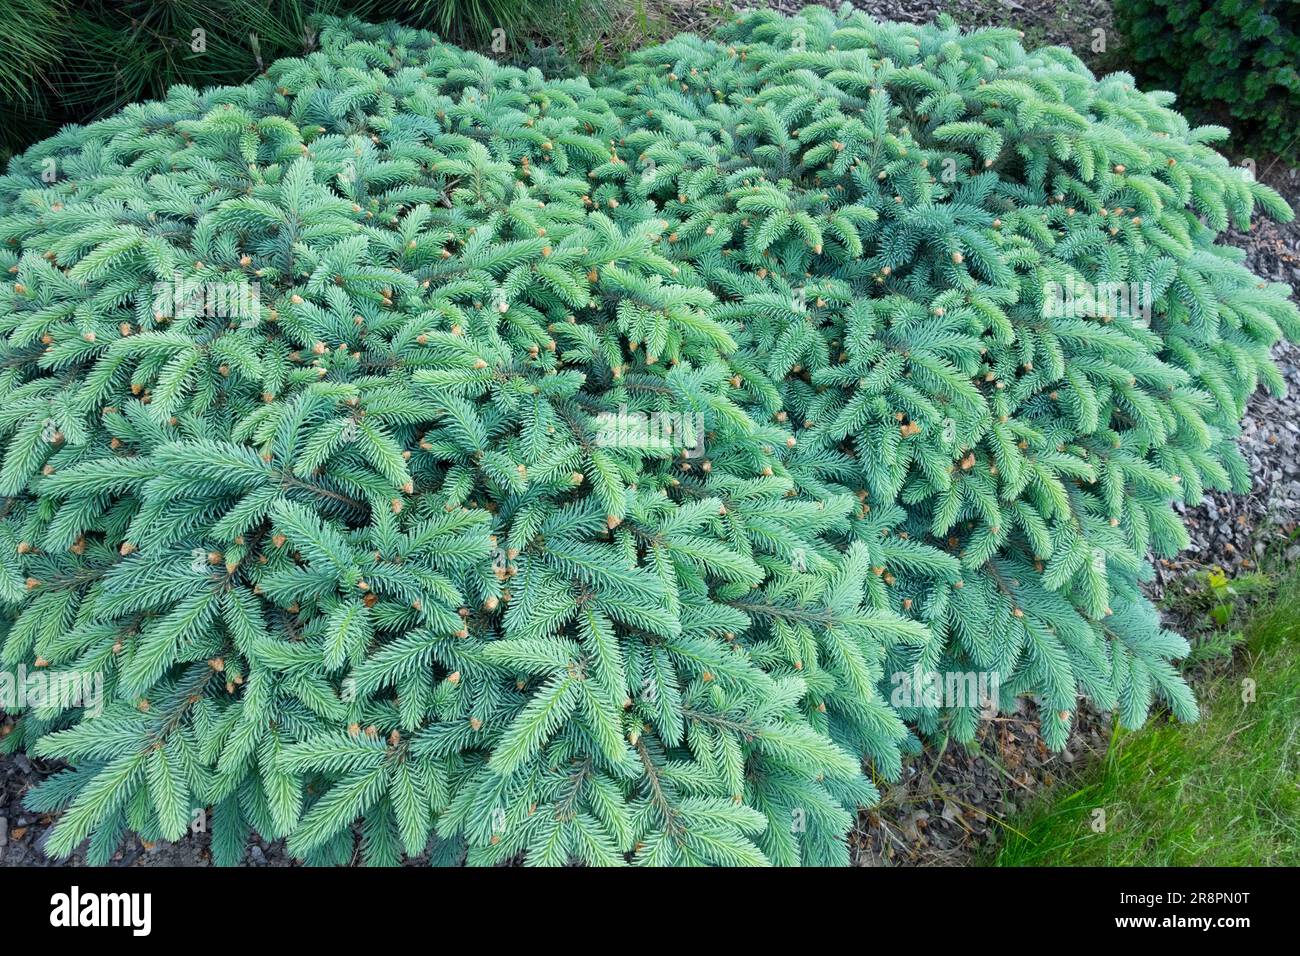 Colorado Blue Spruce, Picea pungens 'Nidiformis', Prostrate, Spruce Spring Branches Blue Needles Stunted Specimen Conifer plant Low Cultivar Stock Photo